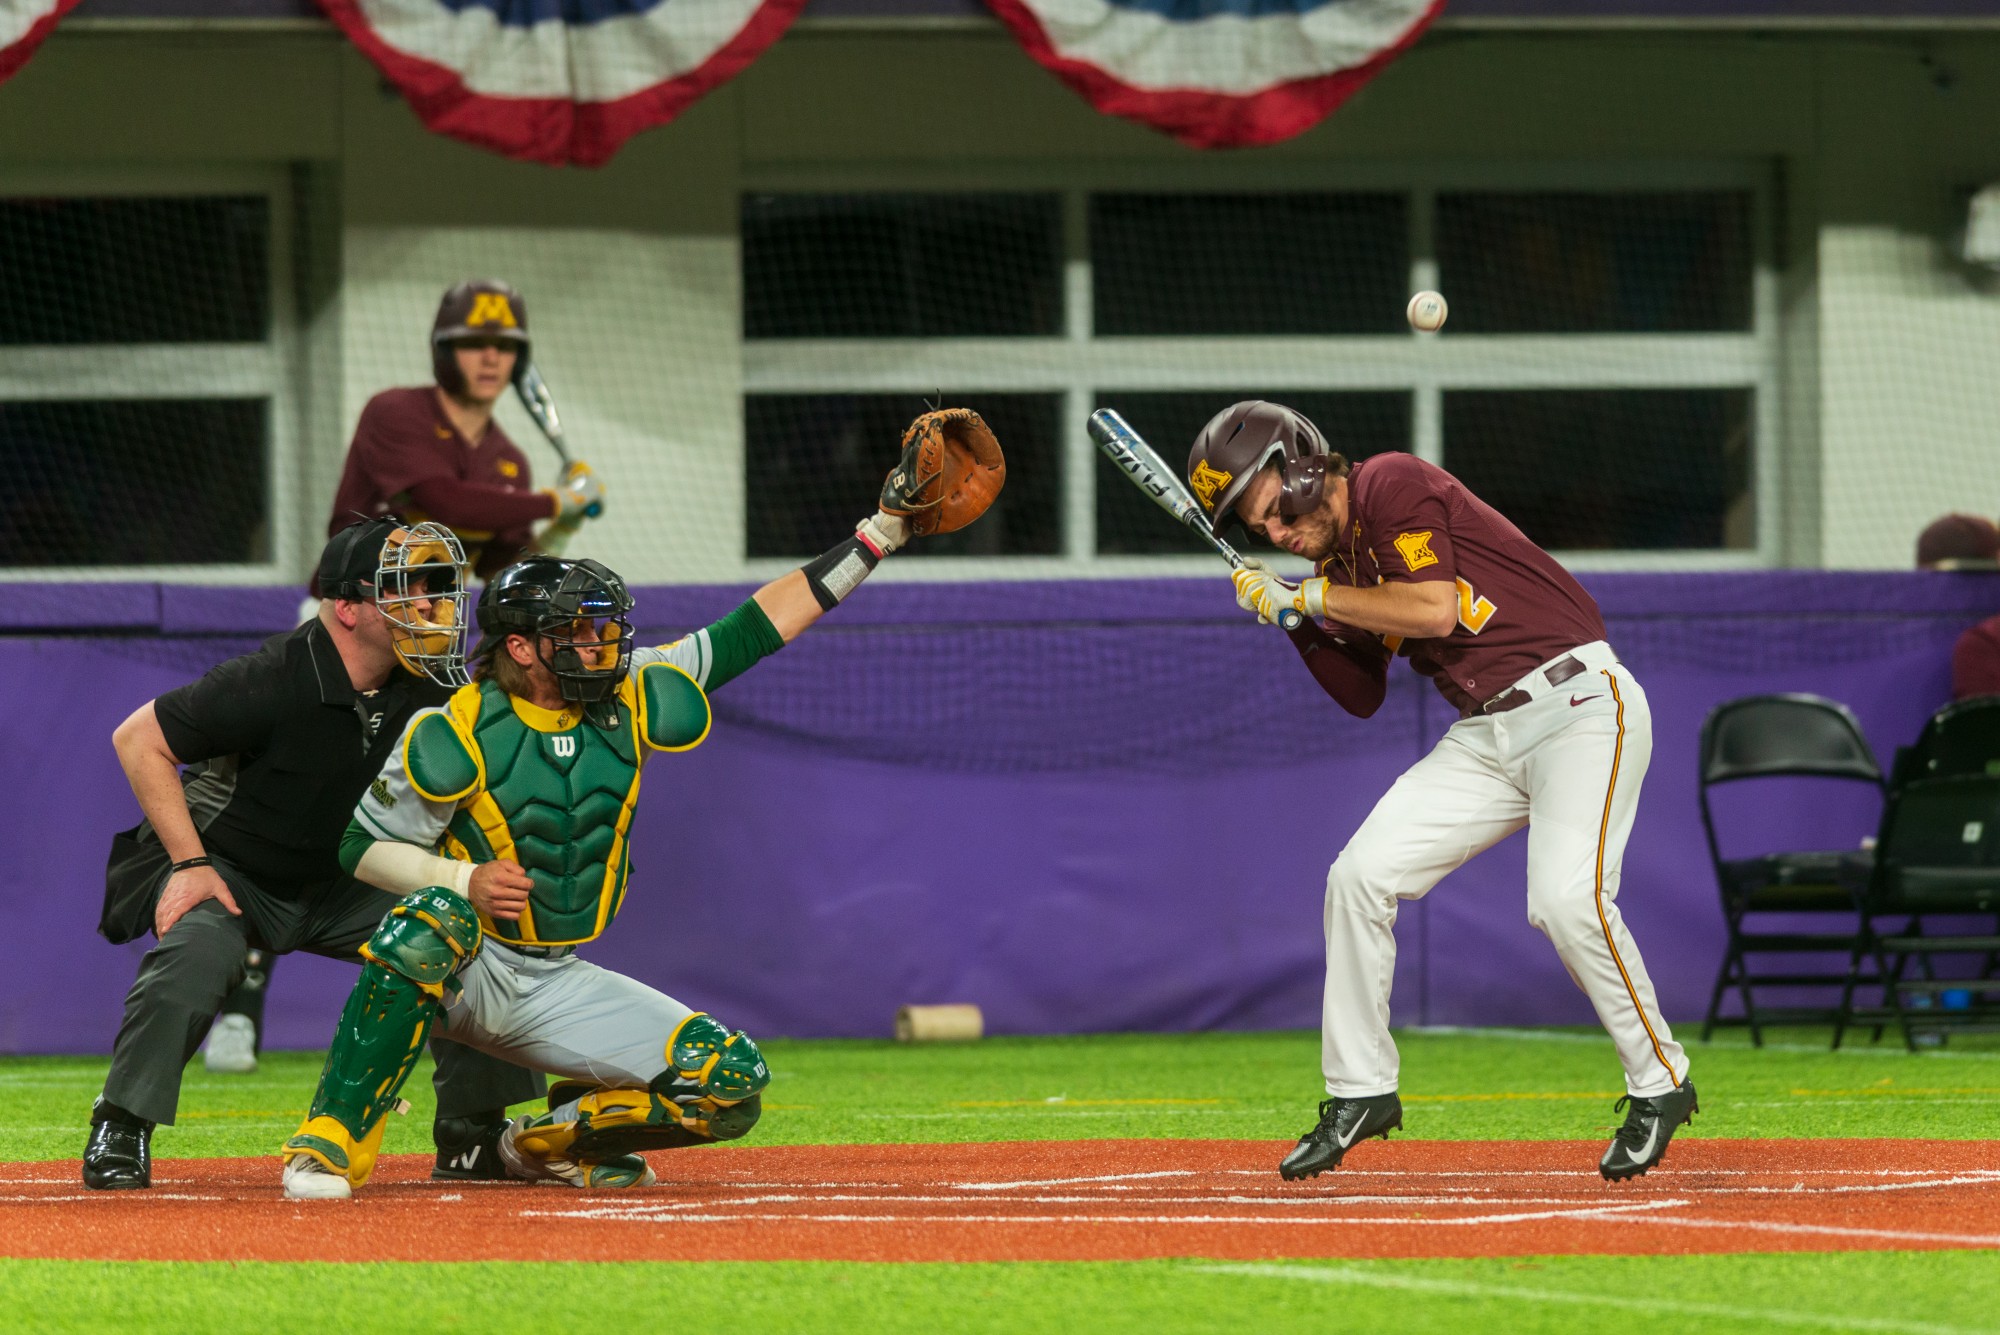 Gophers Infielder Zack Raabe is struck by a pitch at U.S. Bank Stadium on Tuesday, March 3.